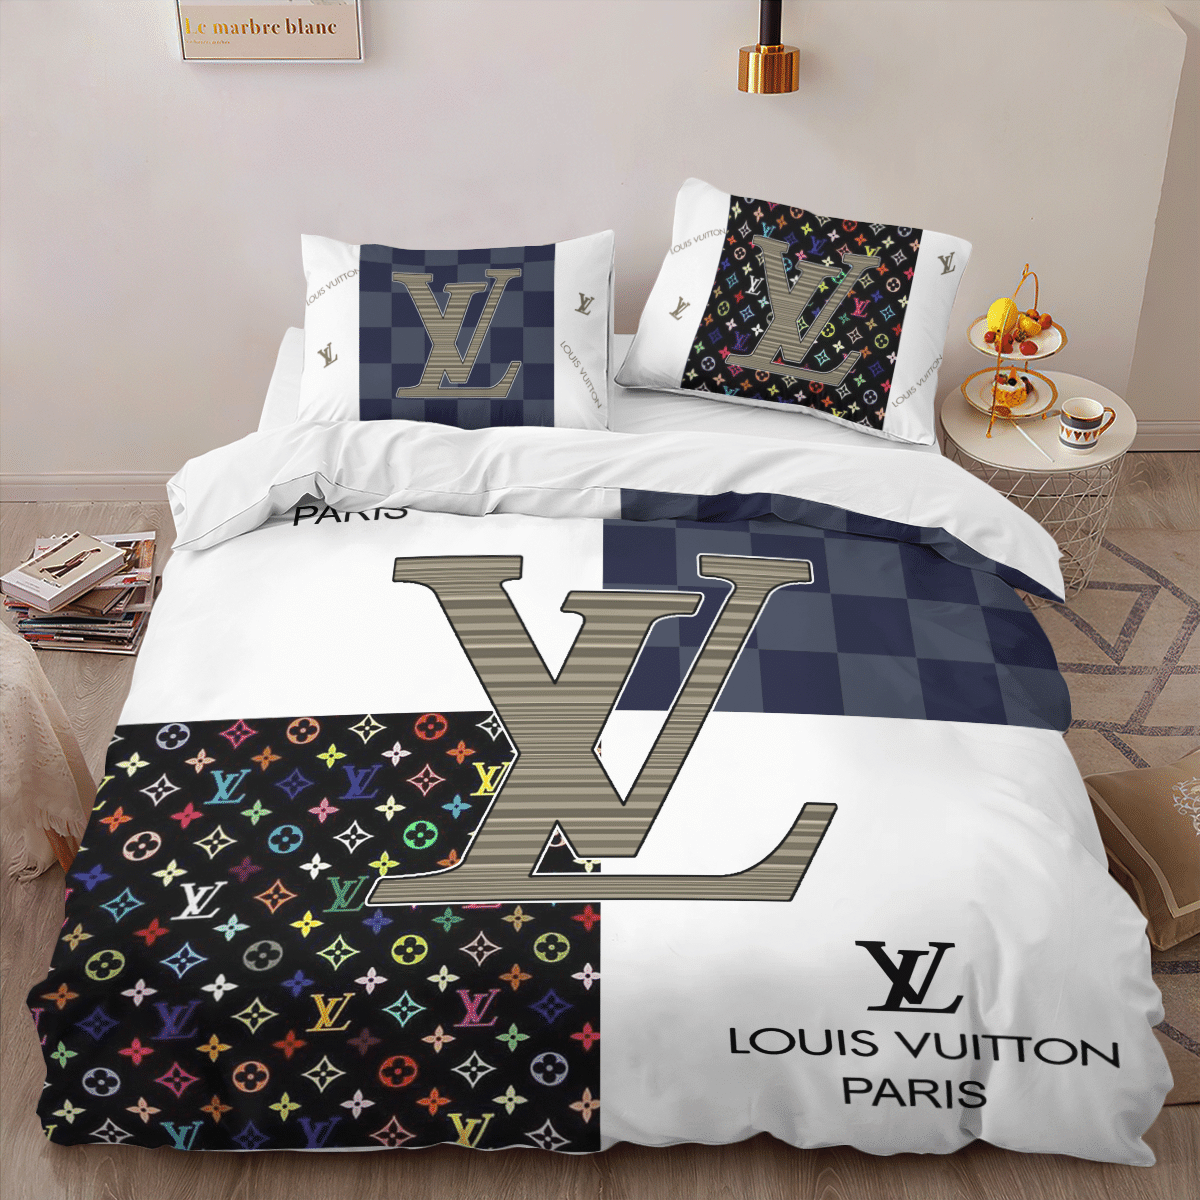 Let me show you about some luxury brand bedding set 2022 5